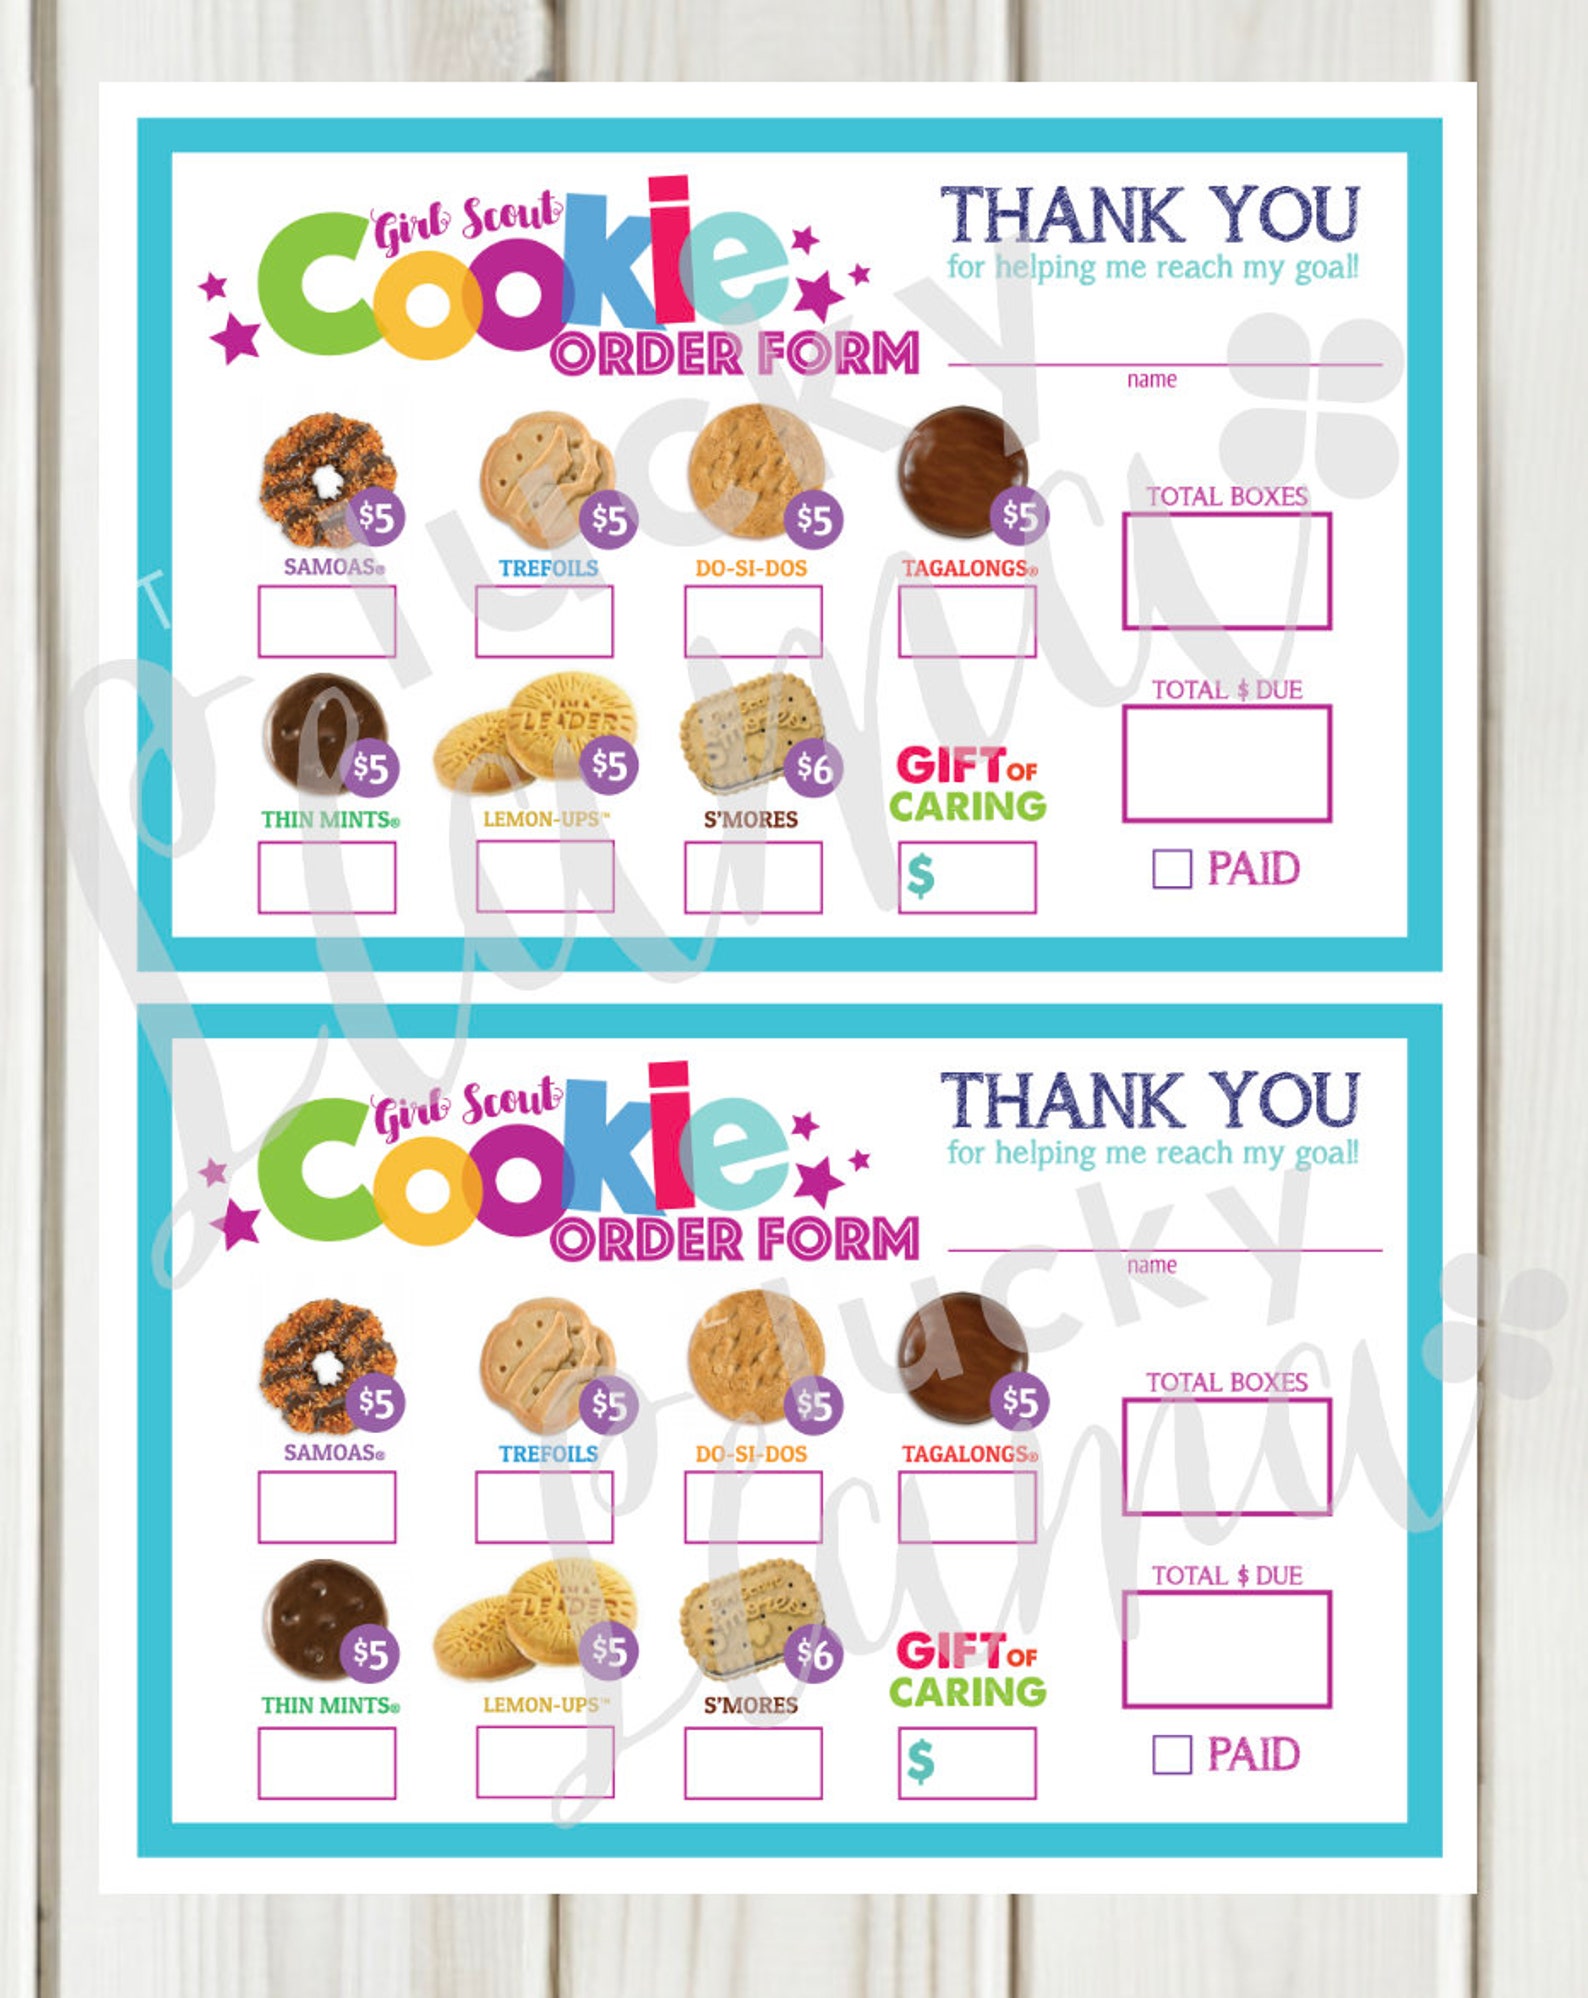 LBB Girl Scout Cookie Order Form Printable Etsy